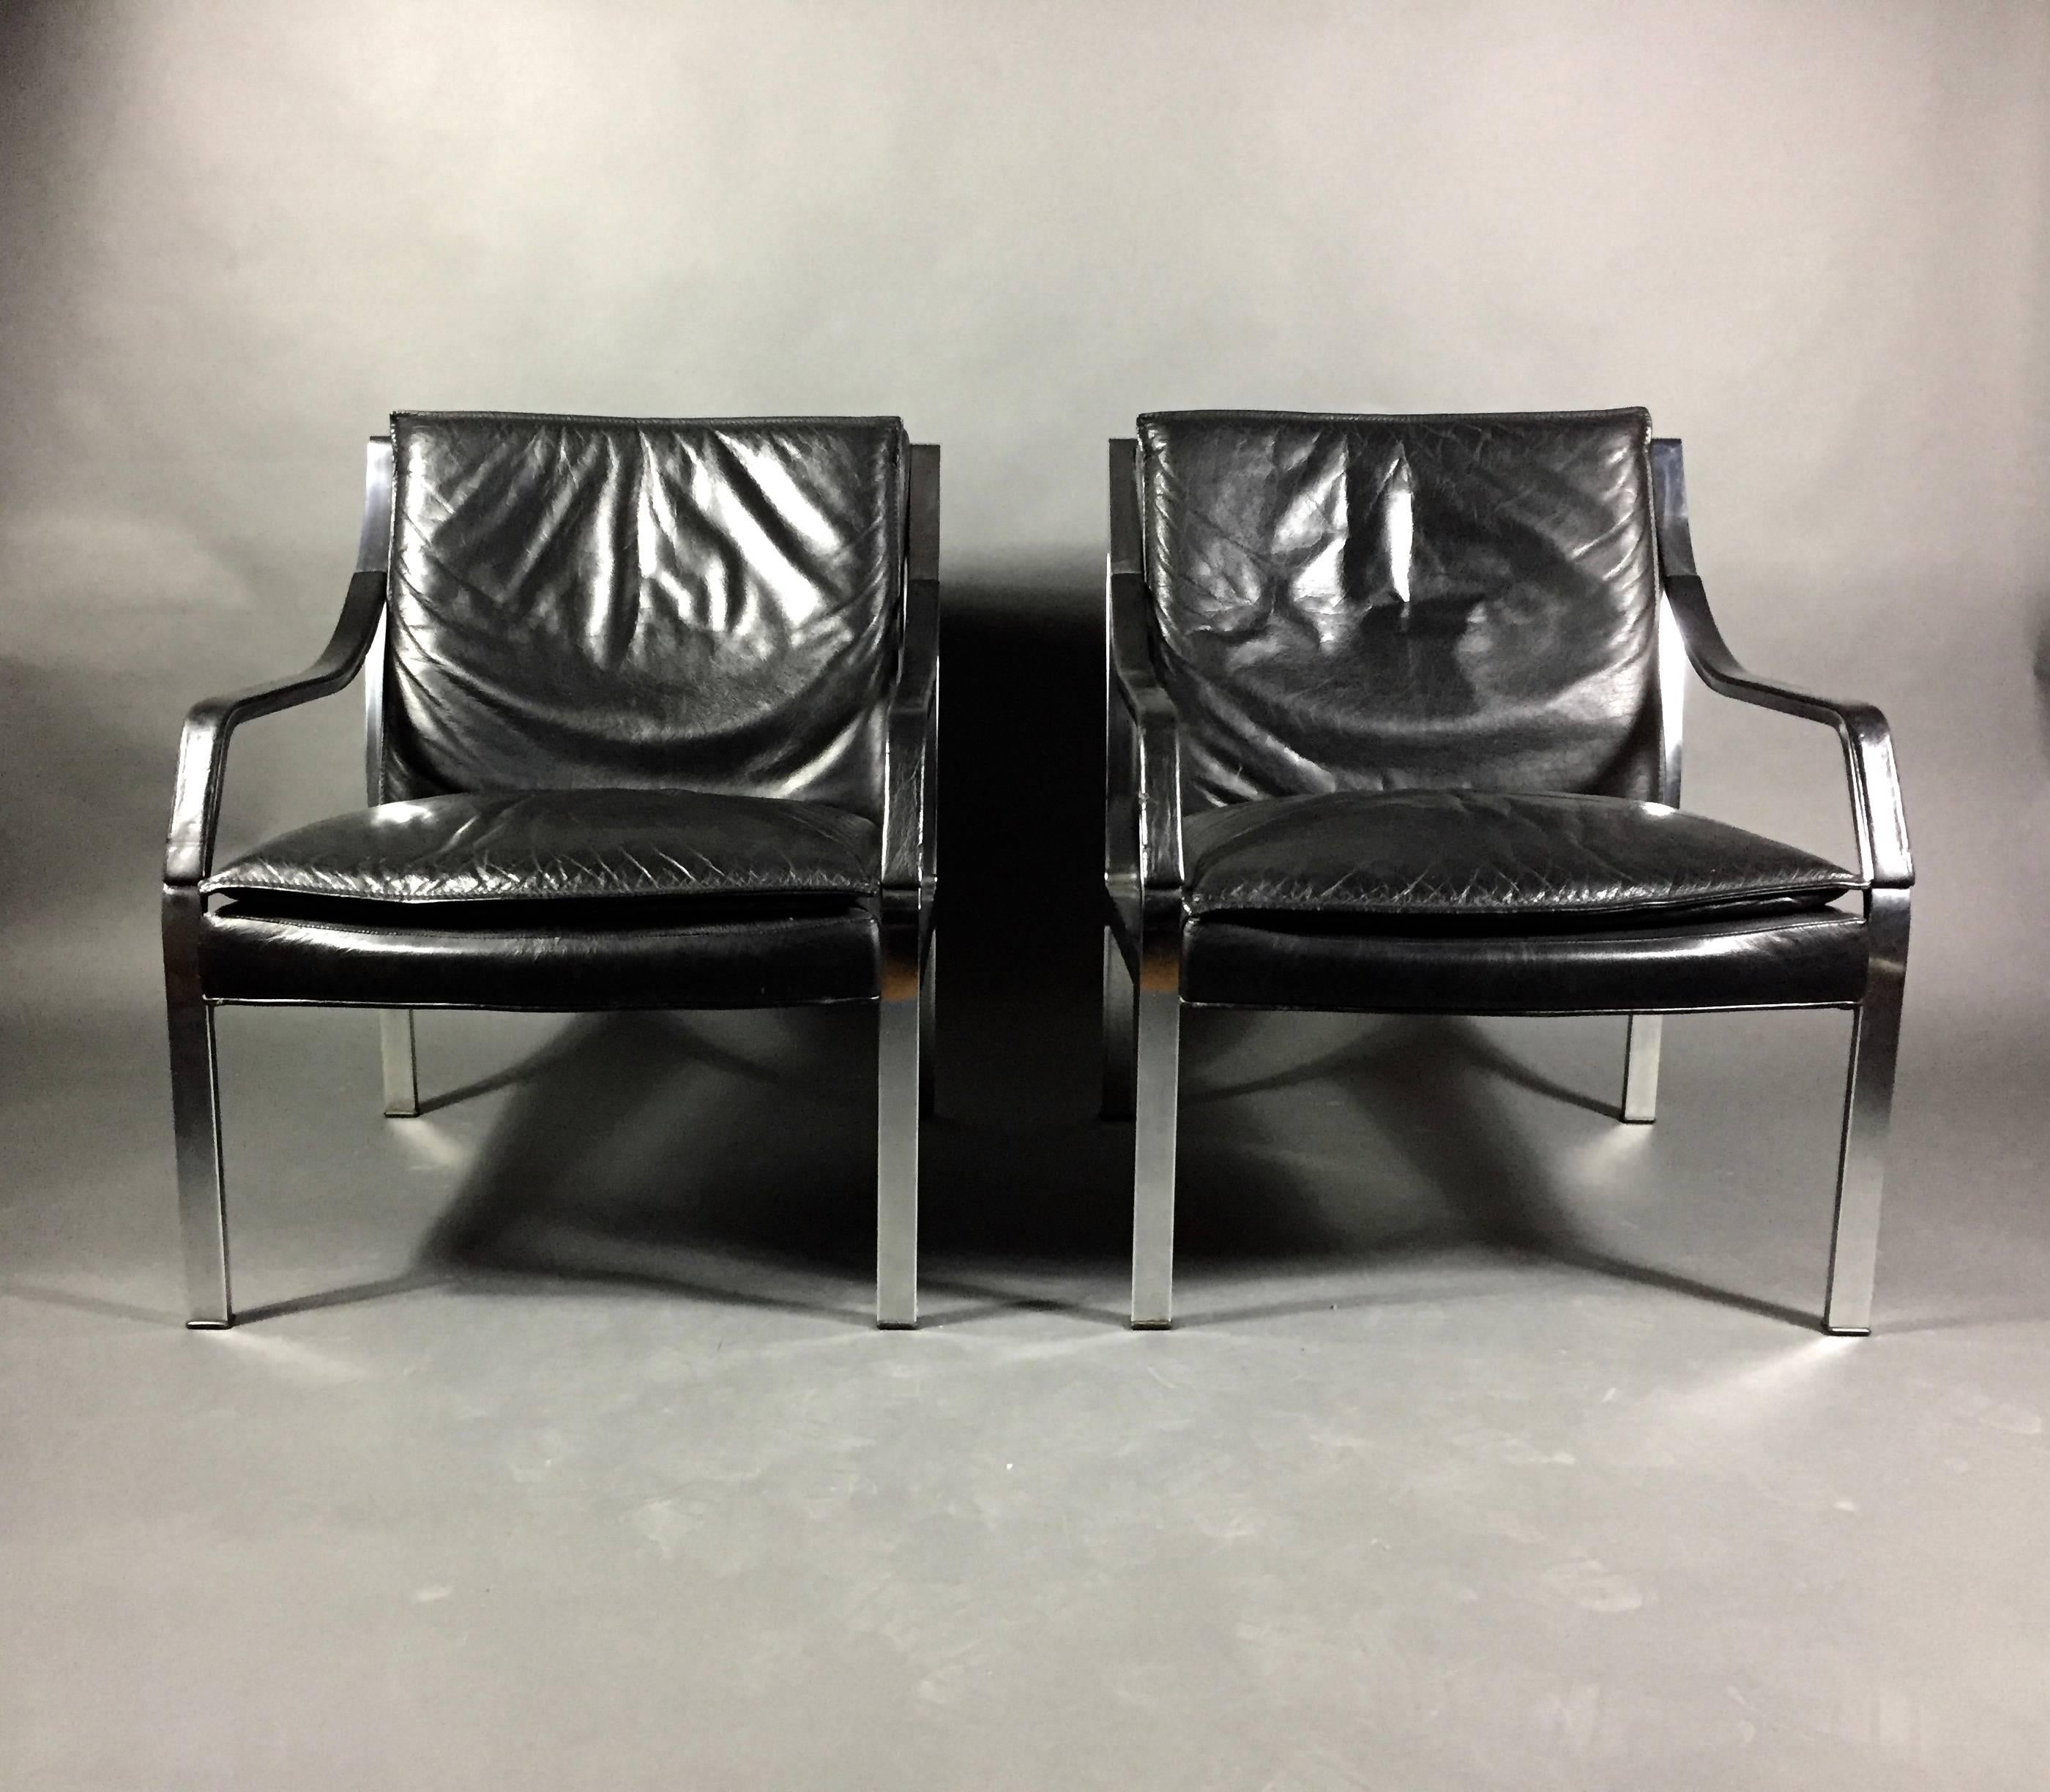 A pair of Preben Fabricius armchairs designed for the Art Collection series by Walter Knoll, Germany in early 1970s. These are an incredibly solid pair constructed with chromed square steel tube frames and black leather seating. Note the tight